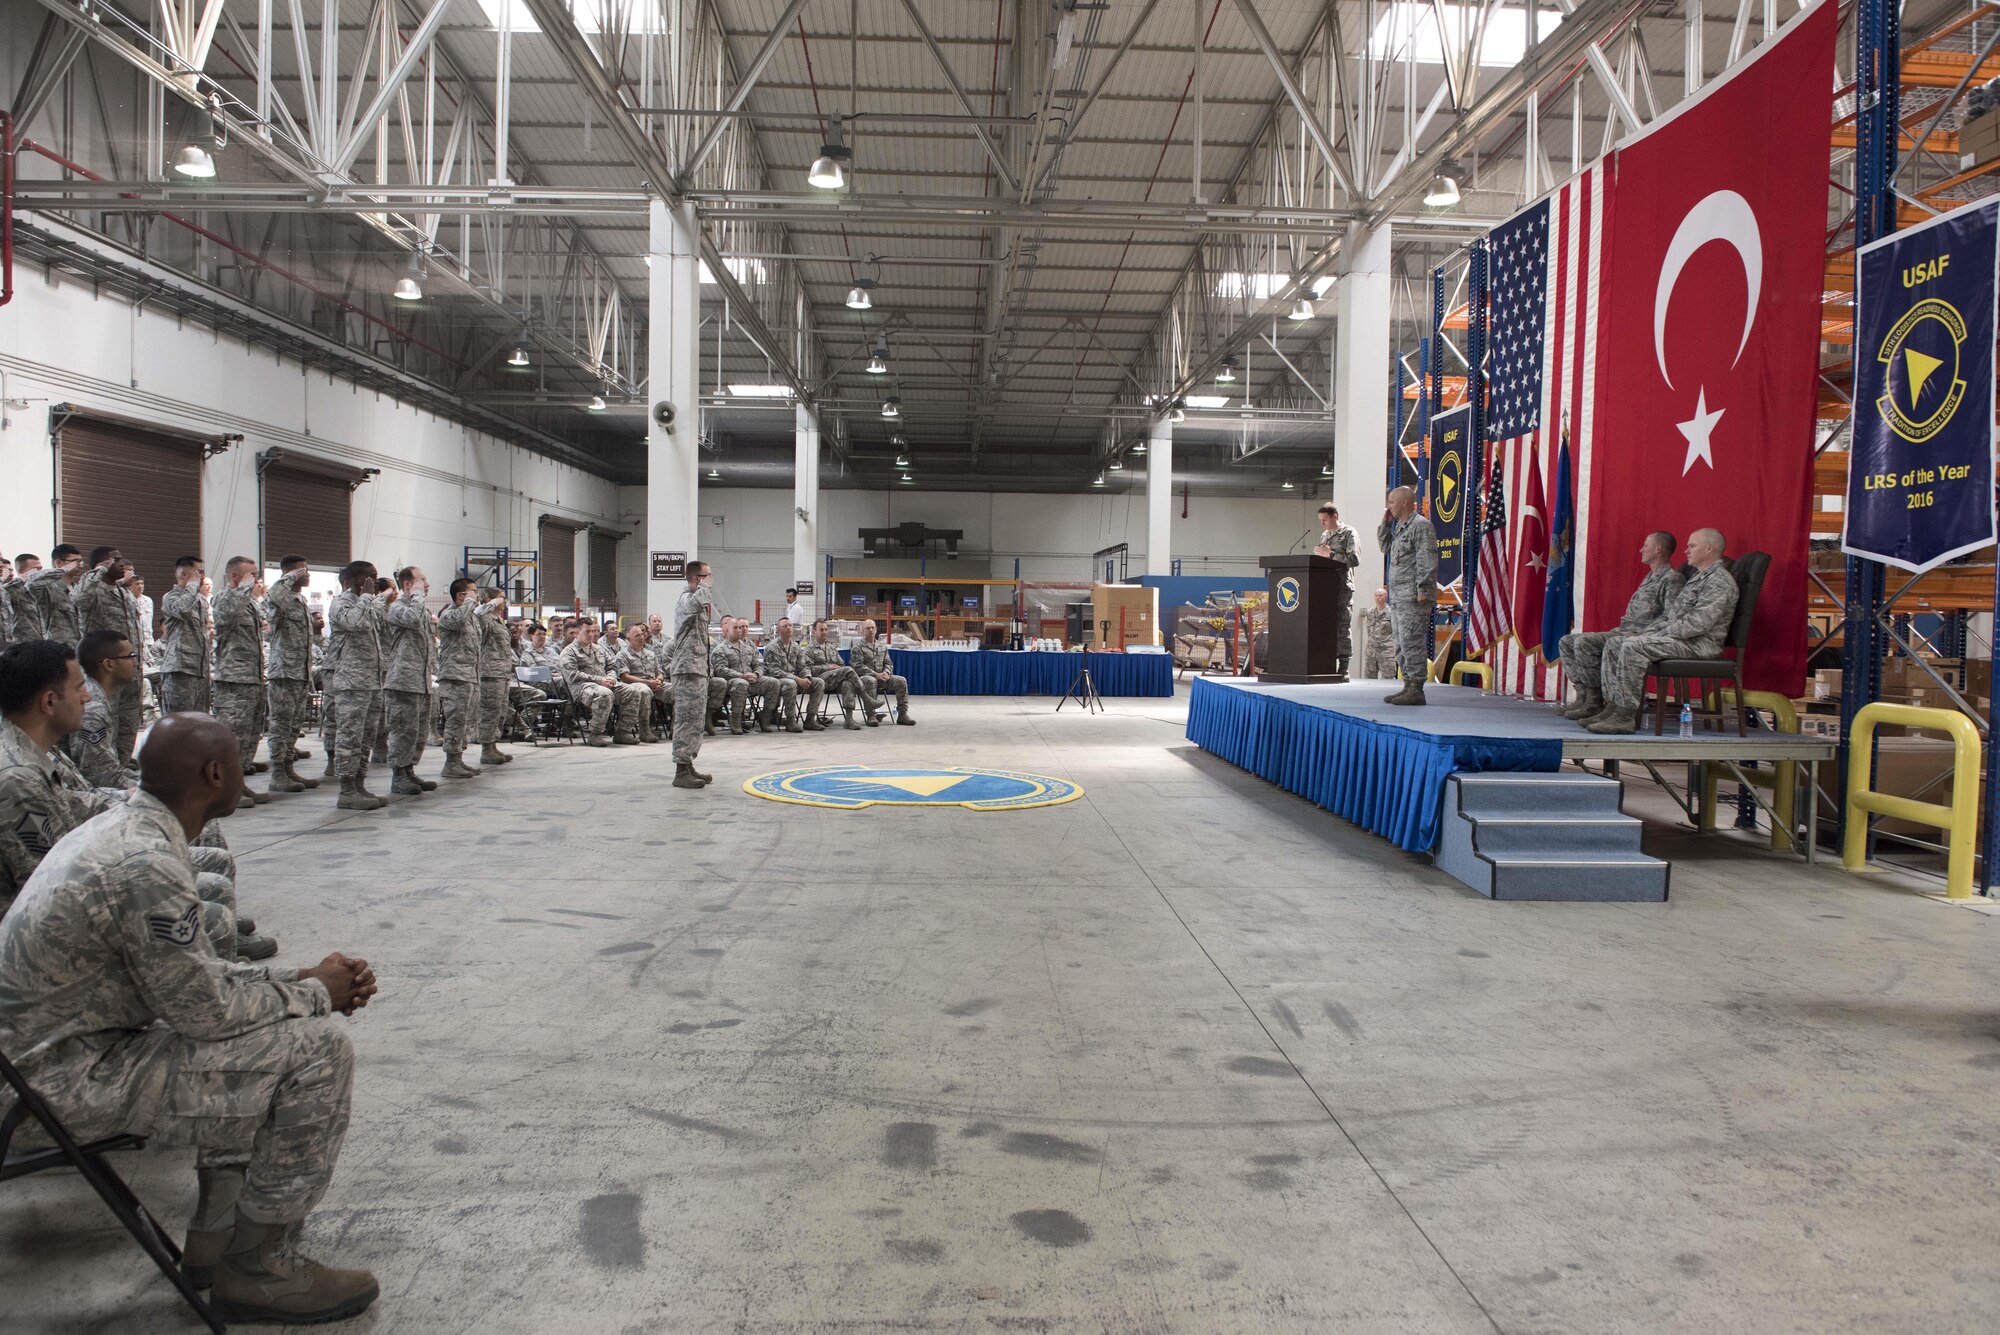 The 39th Logistics Readiness Squadron renders a final salute to Lt. Col. Phillip Wheeler, 39th Logistics Readiness Squadron commander June 29, 2017, at Incirlik Air Base, Turkey. Wheeler relinquished command to Maj. Matthew Shaw, incoming 39th LRS commander. (U.S. Air Force photo by Airman 1st Class Kristan Campbell)